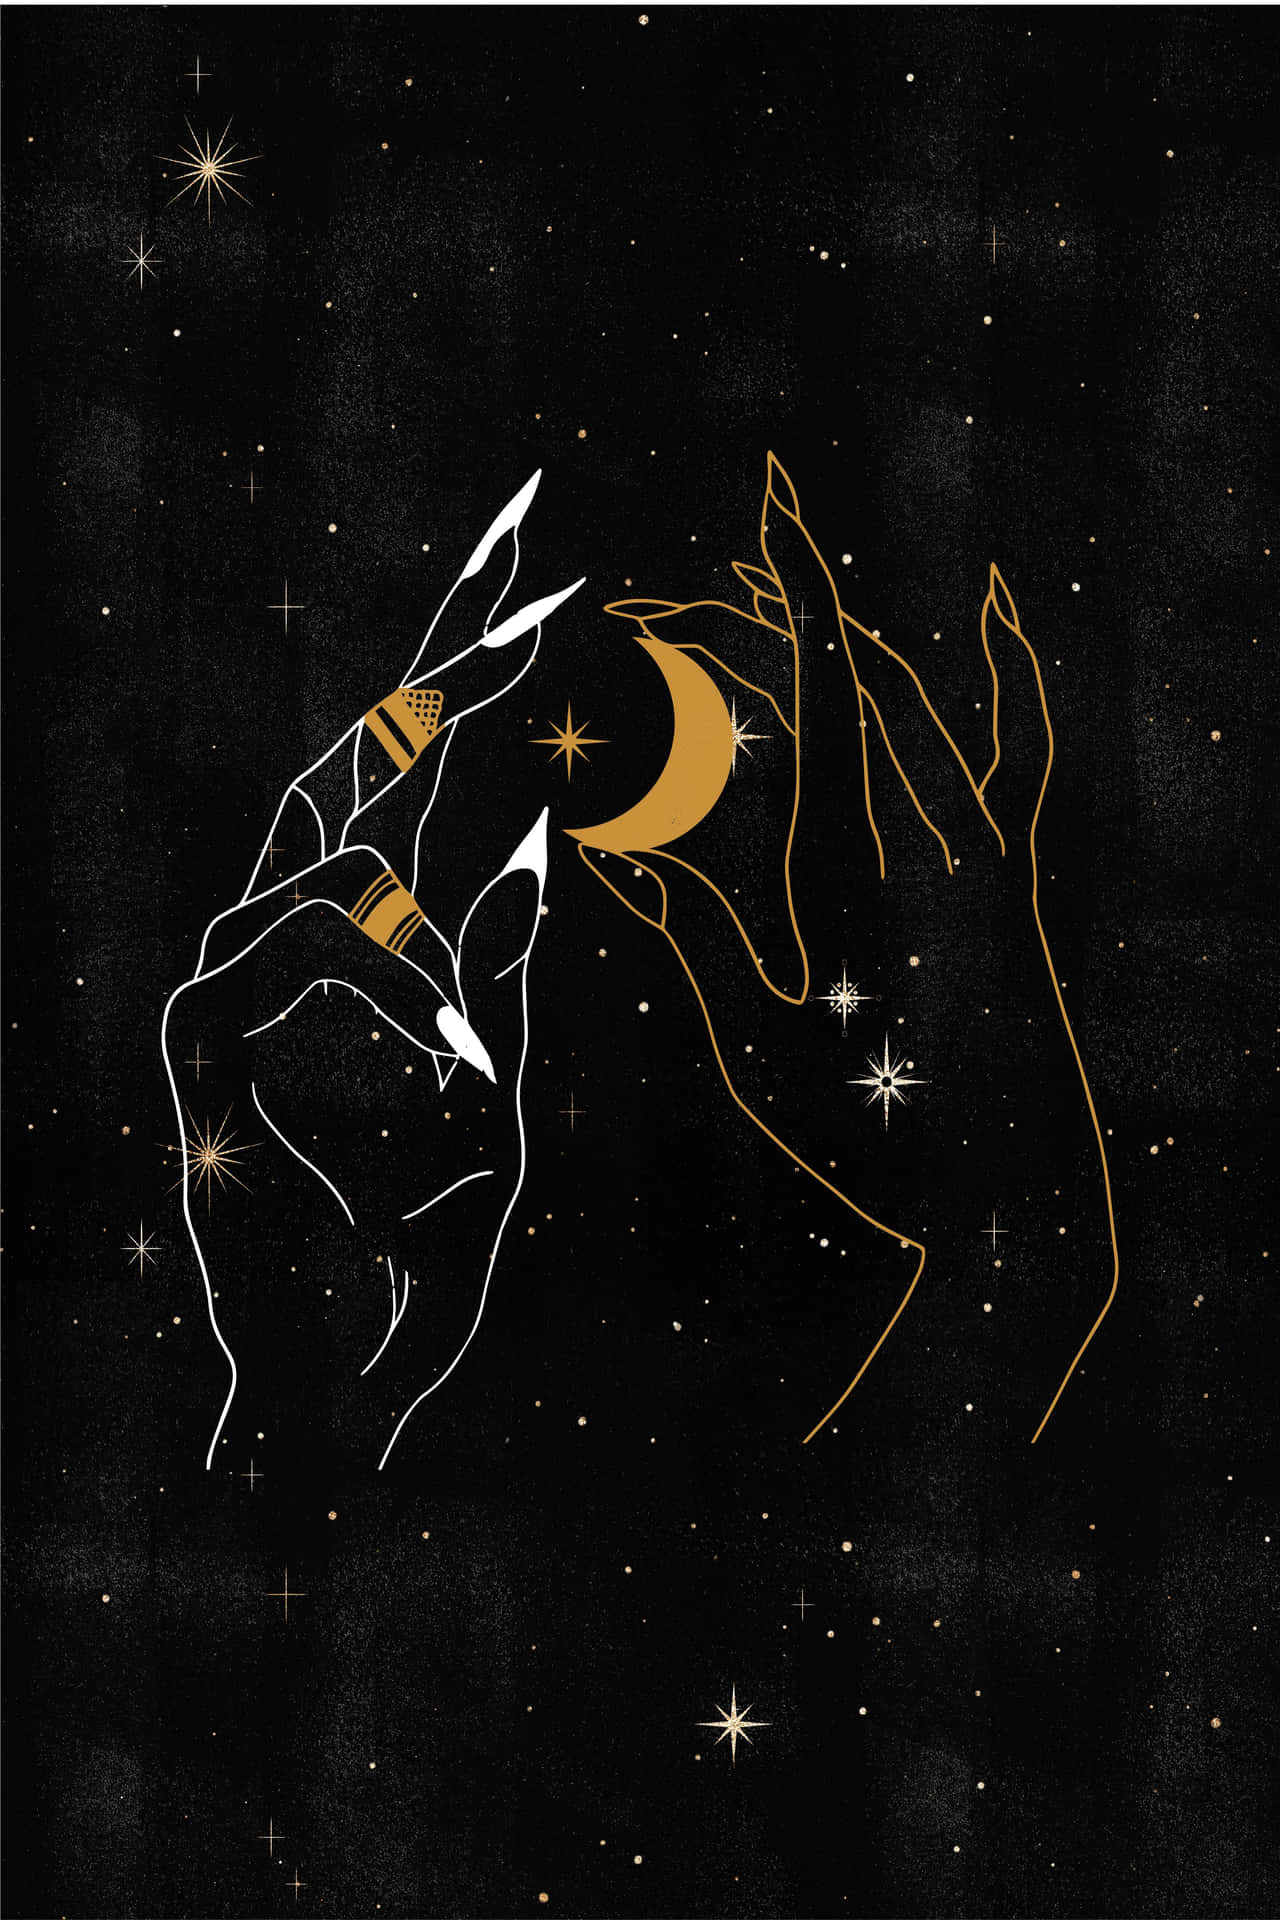 Two hands holding a crescent moon and stars. - Magic